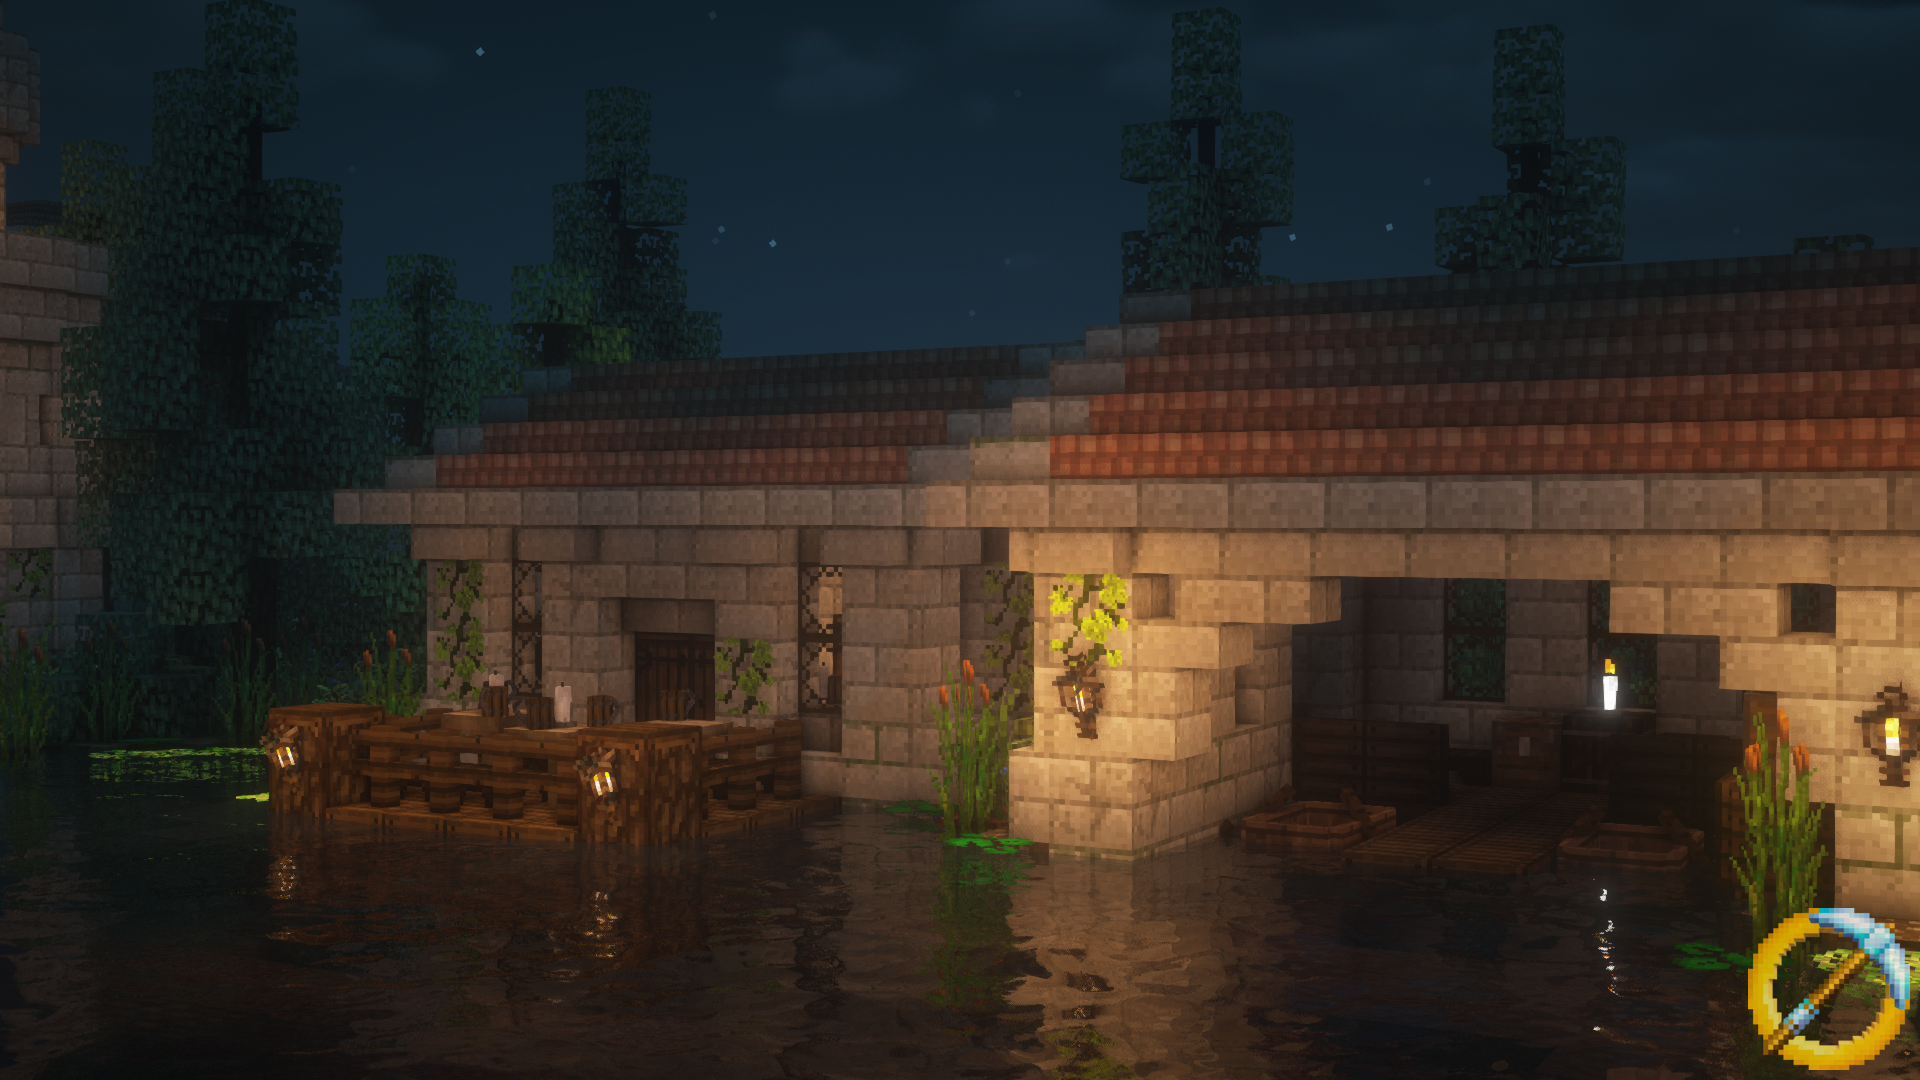 A Peaceful Night at the Boathouse